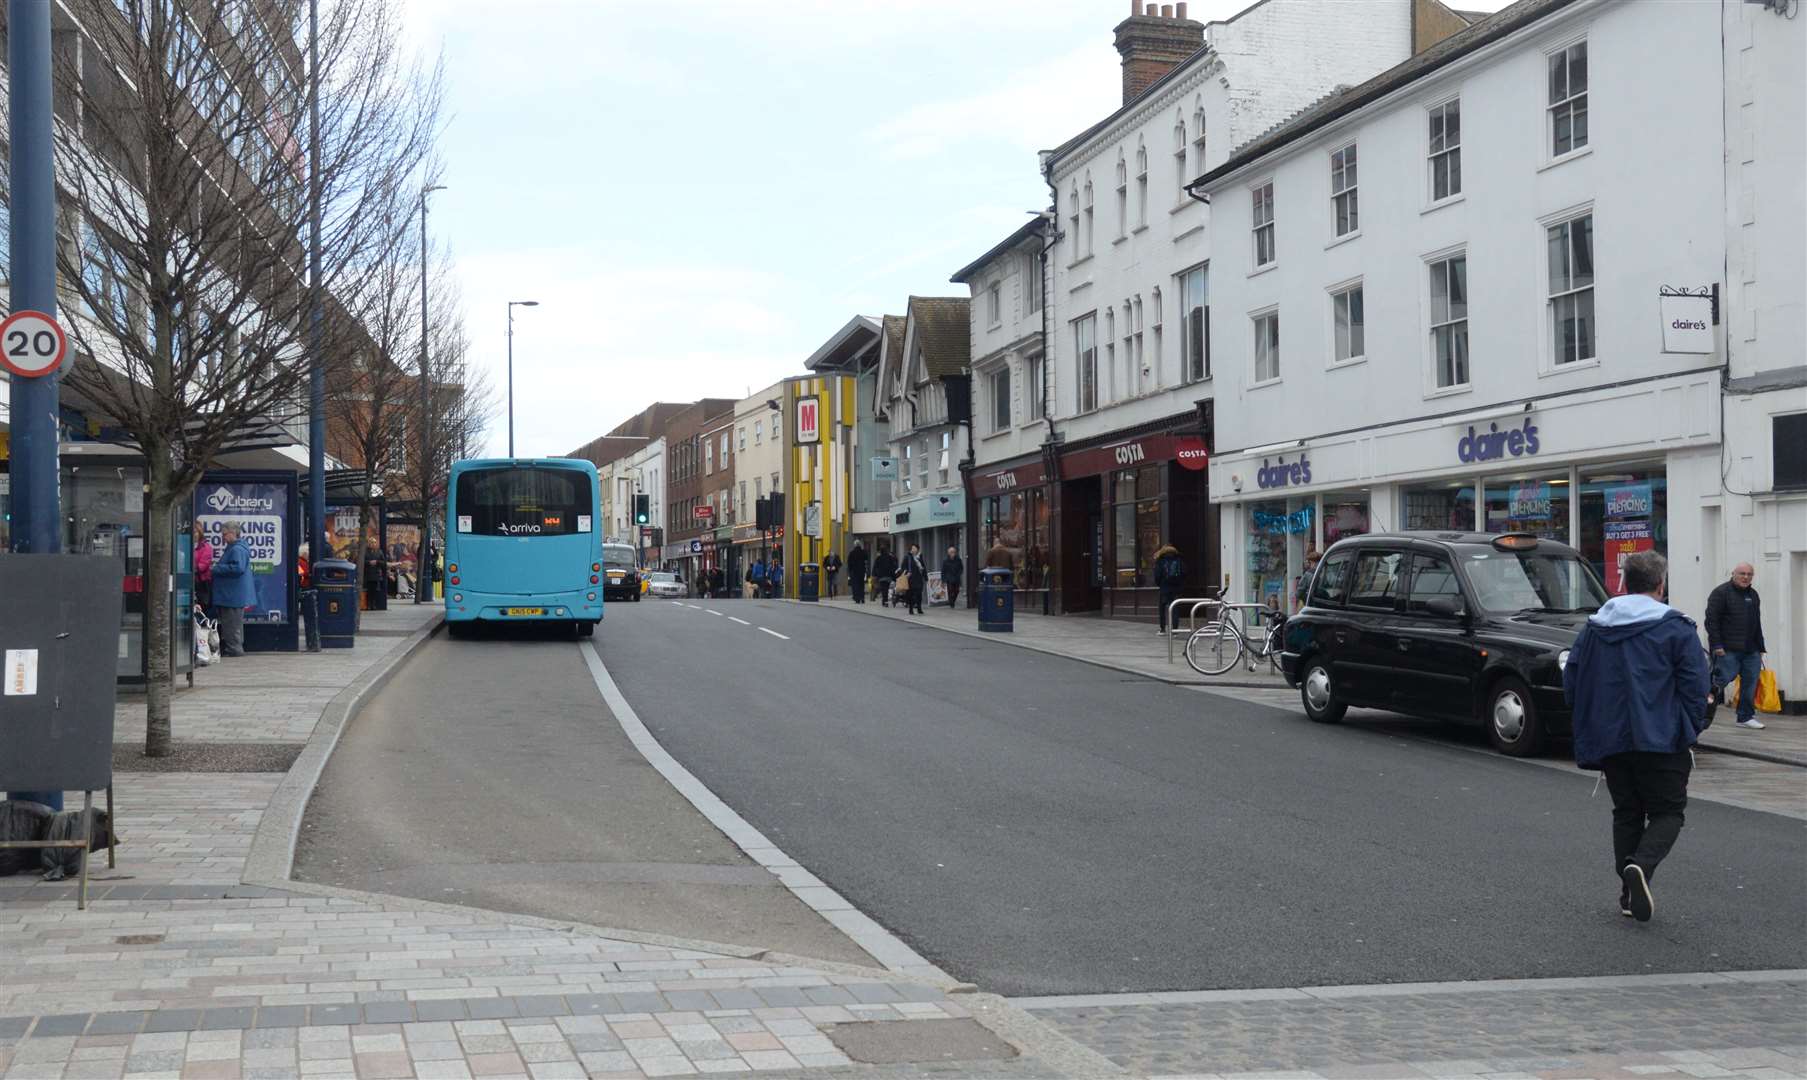 Businesses in Maidstone can apply for Government grants, to help them through the economic crises, seen in the town's quiet high street, bought on by coronavirus Picture: Chris Davey